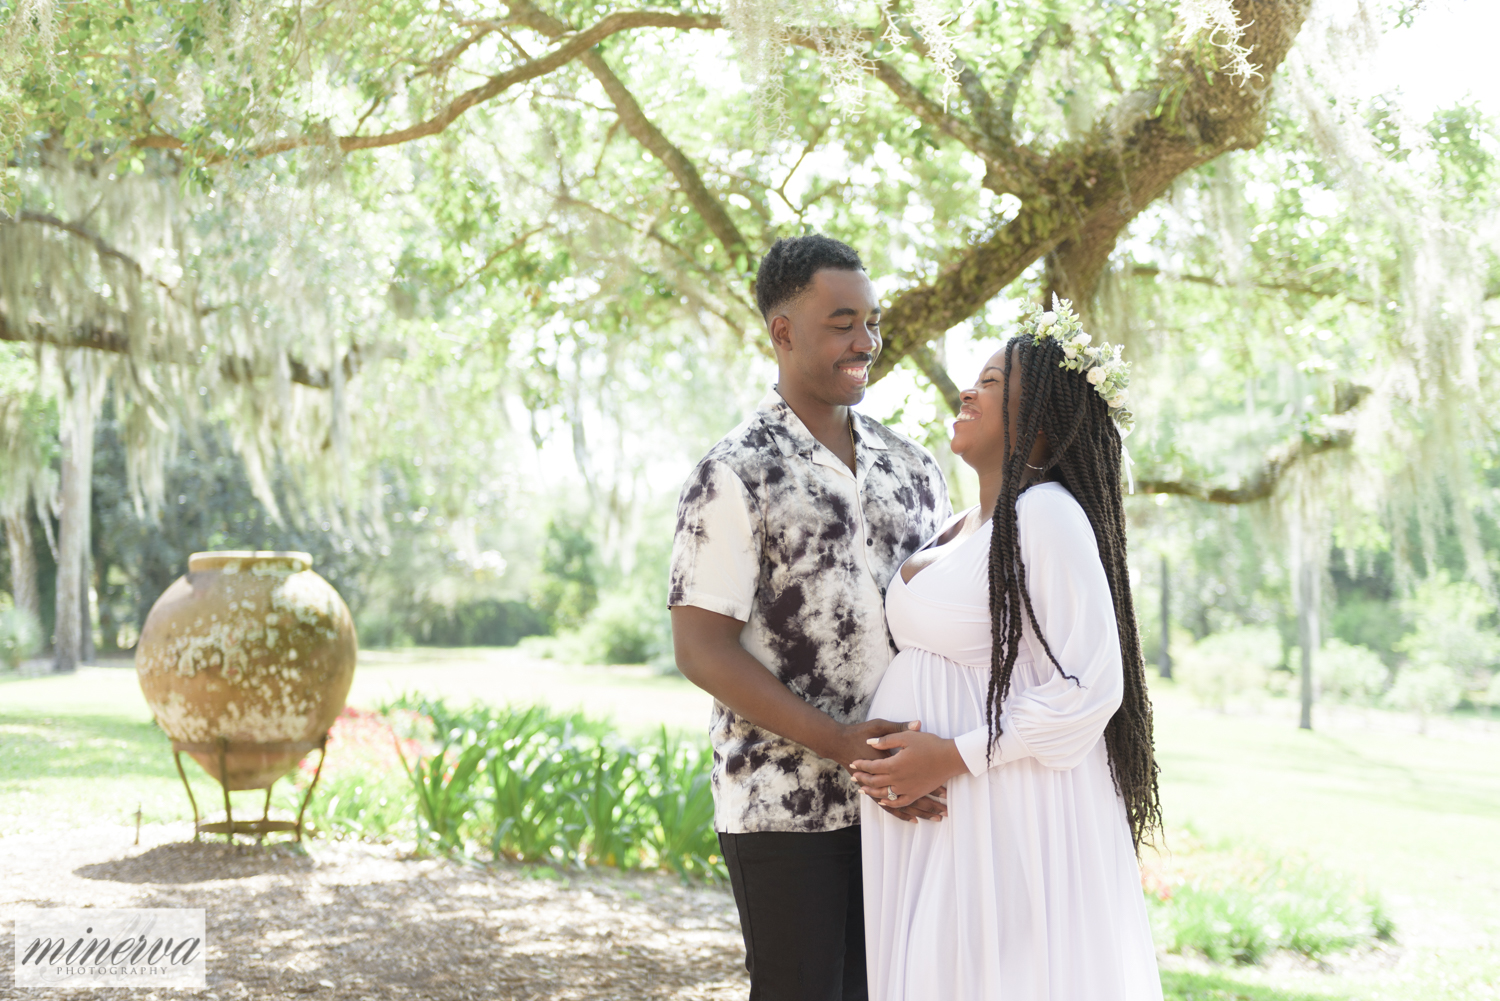 004_bok-tower-gardens_maternity-session_pregnancy-gown_portraits_orlando-photographer_orlando-family-baby-photography_goddess-dress_flower-crown